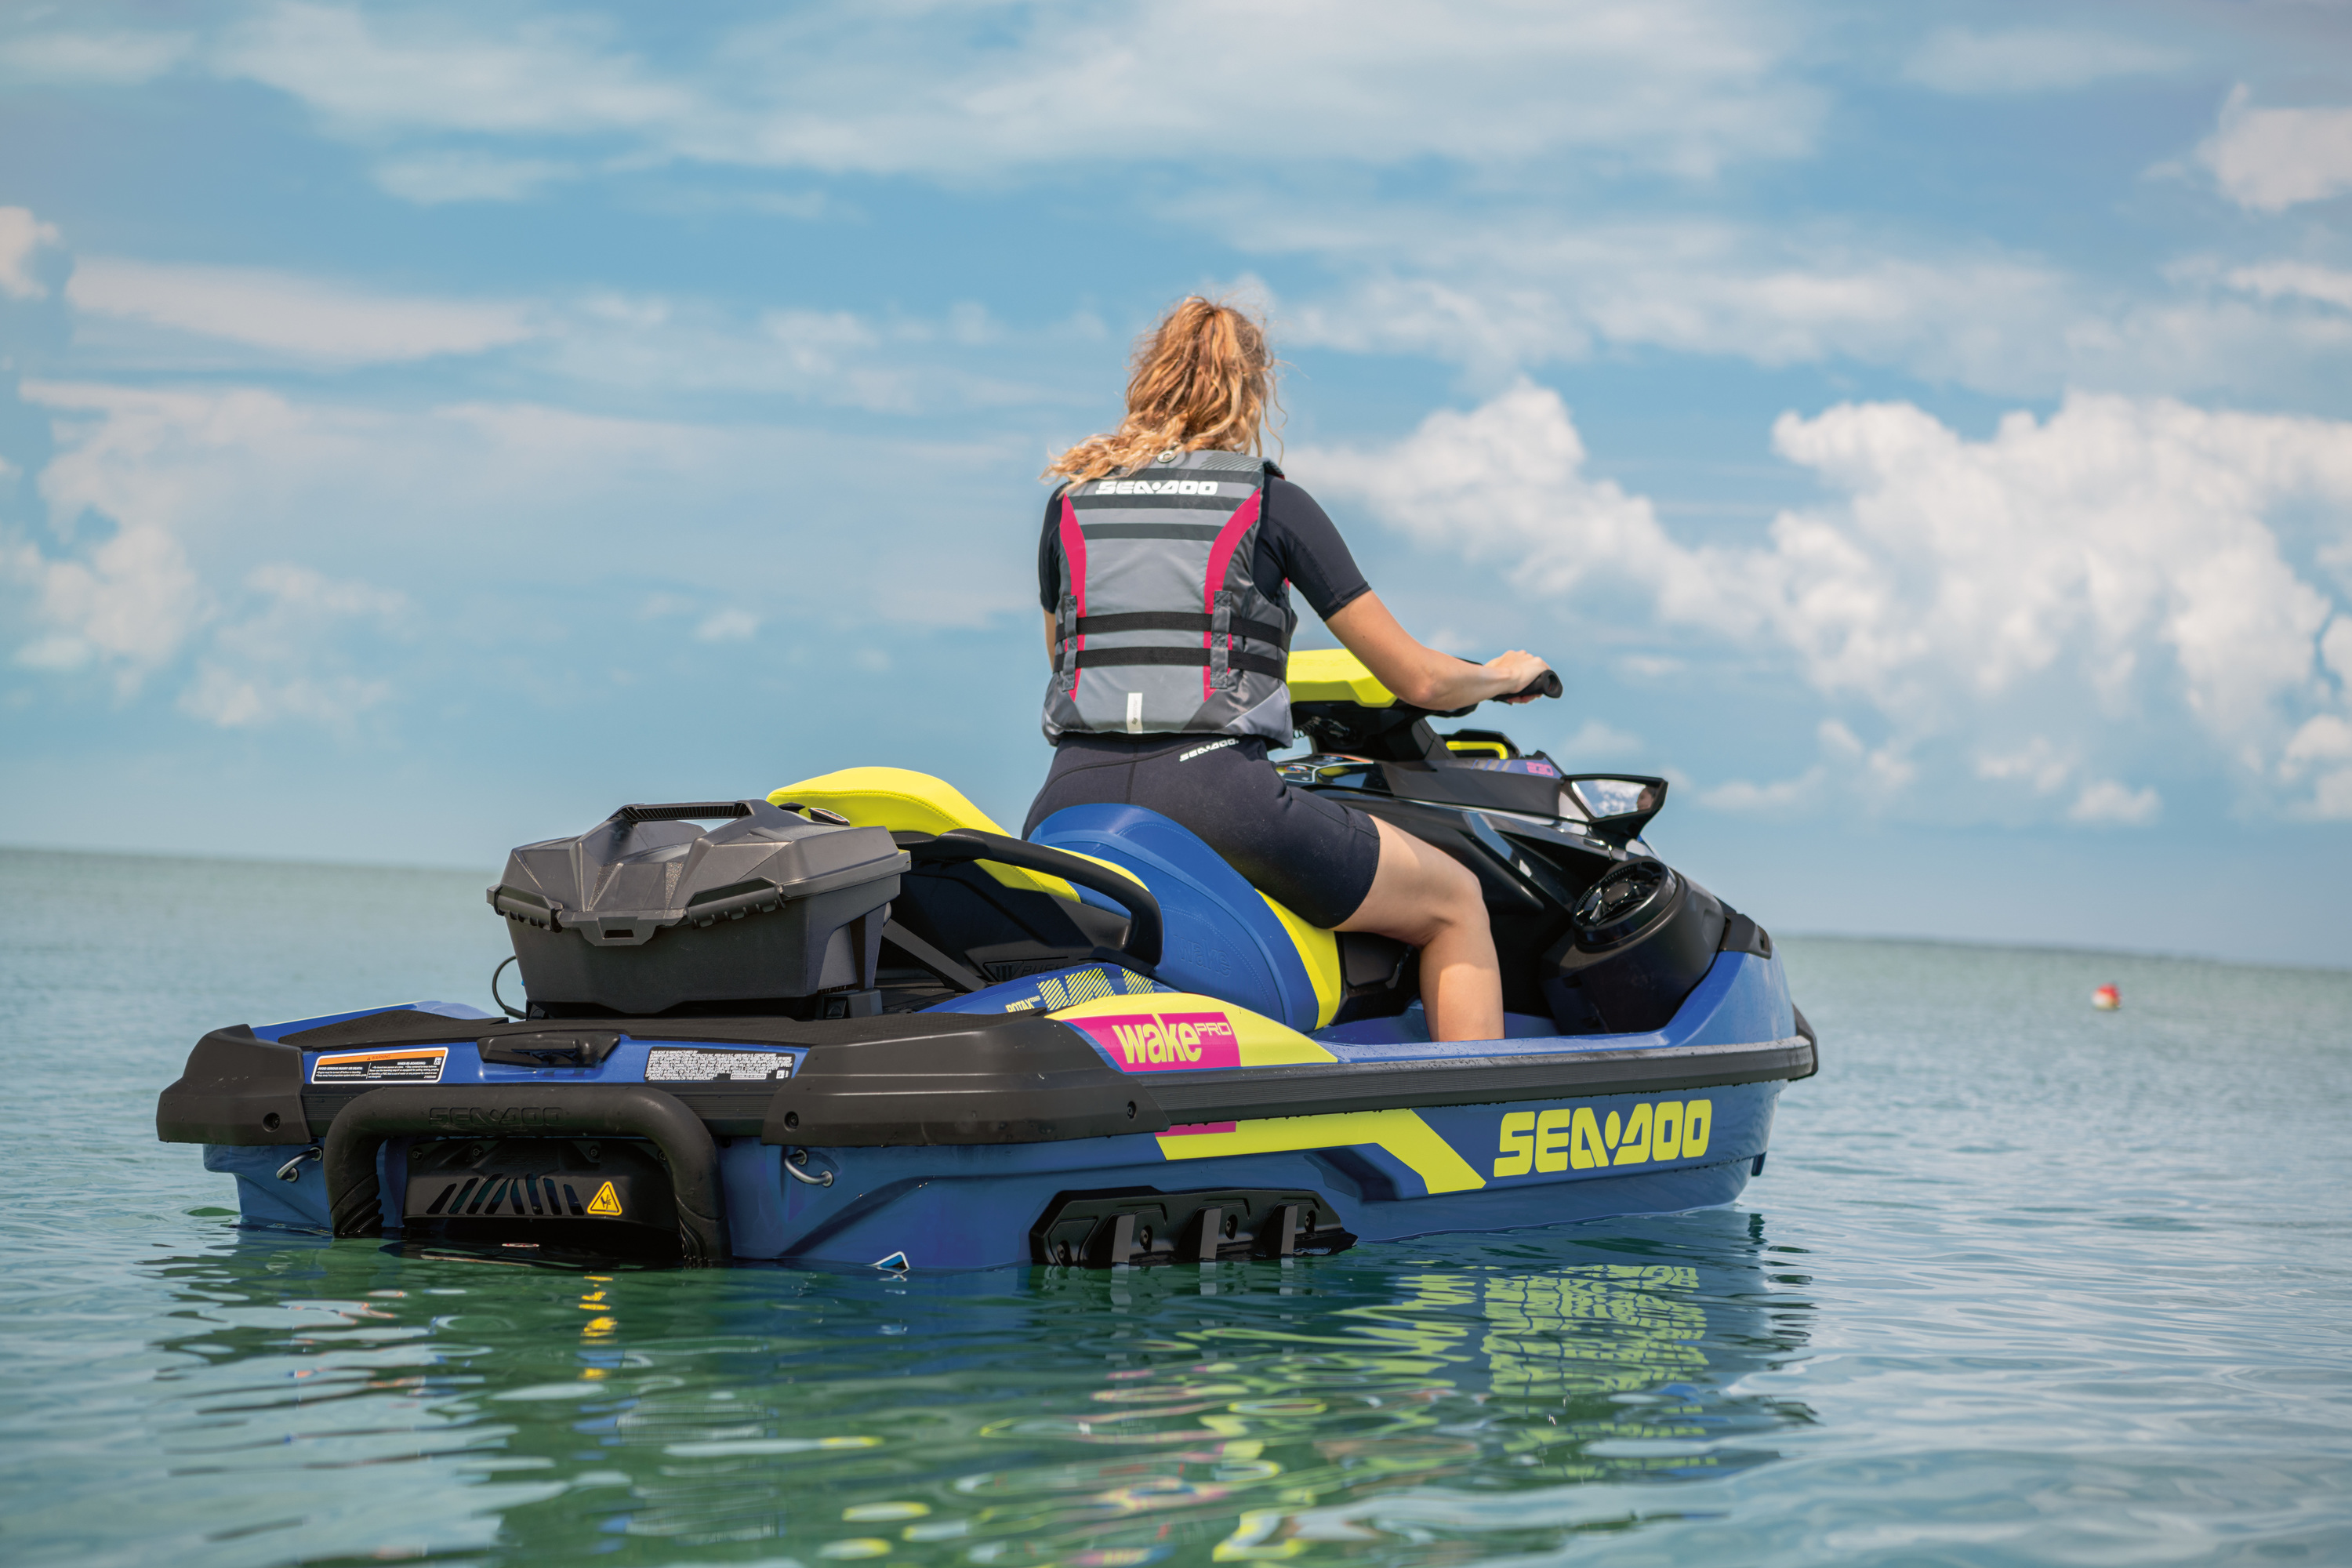 Woman on Sea Doo Wake Pro 230 in blue and yellow with cooler on the back